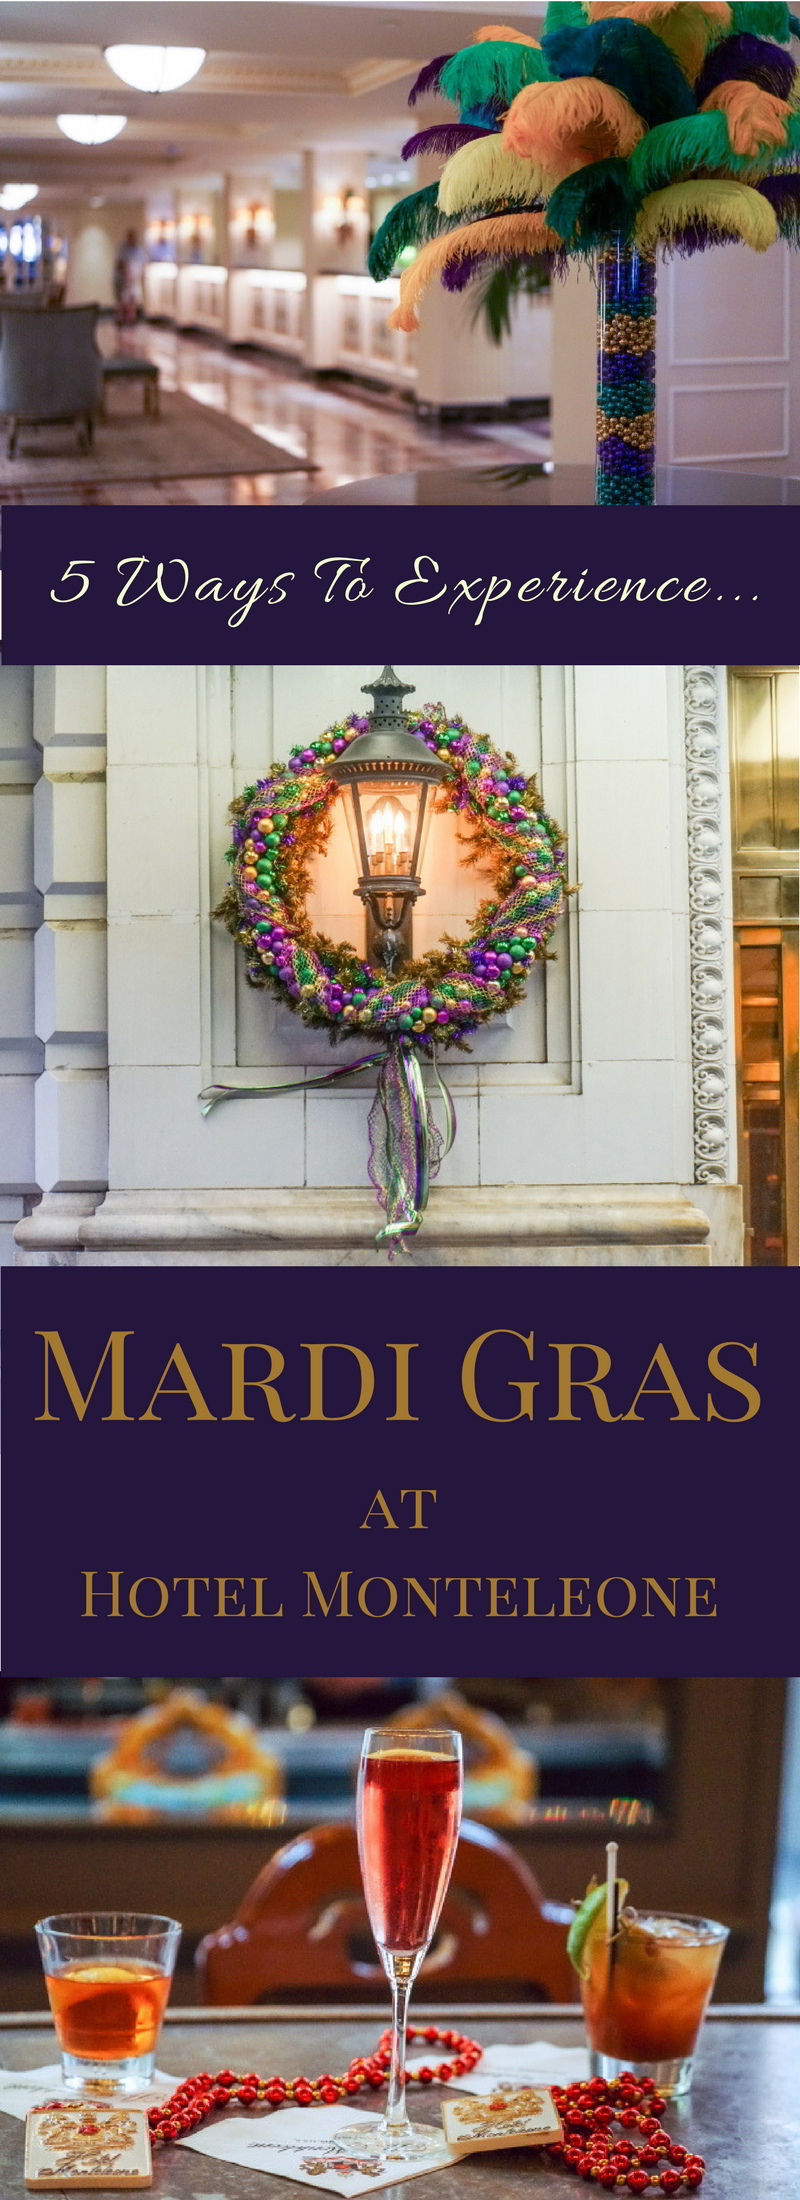 You won’t need to travel far and wide to experience Mardi Gras in New Orleans. Check out 5 ways to experience Mardi Gras at Hotel Monteleone.